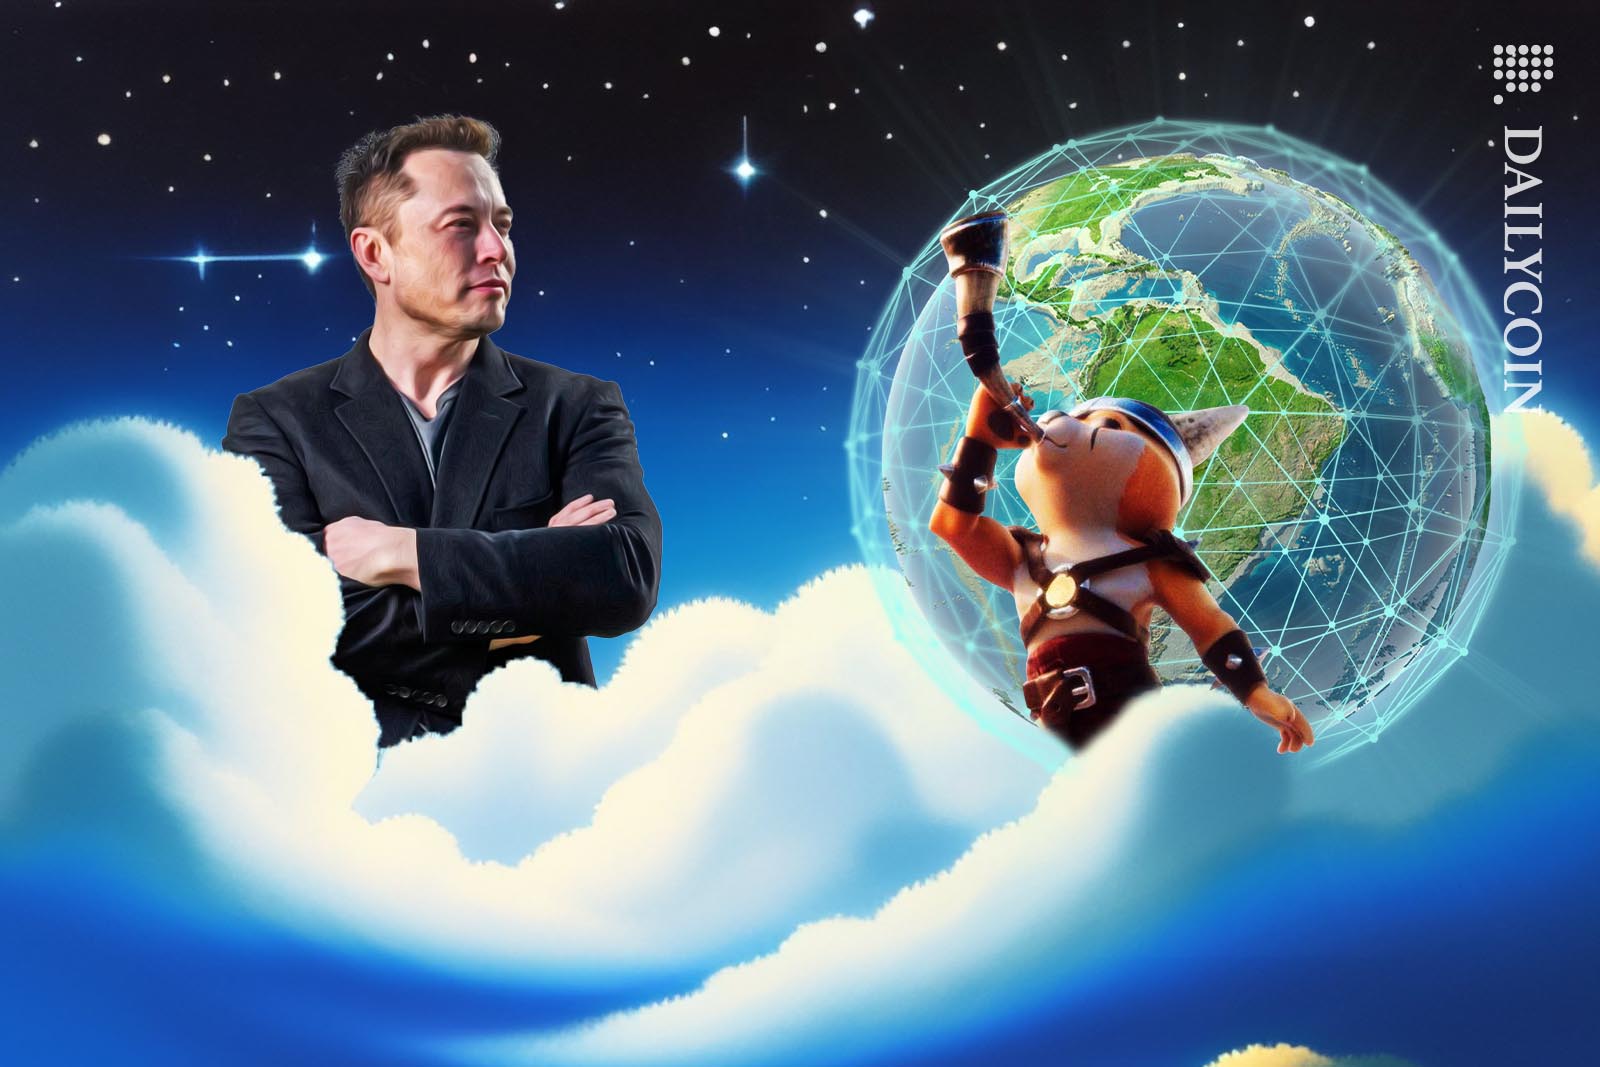 Elon Musk looking at a Floki dog blowing a horn trumpet infront of a digital earth in the clouds.